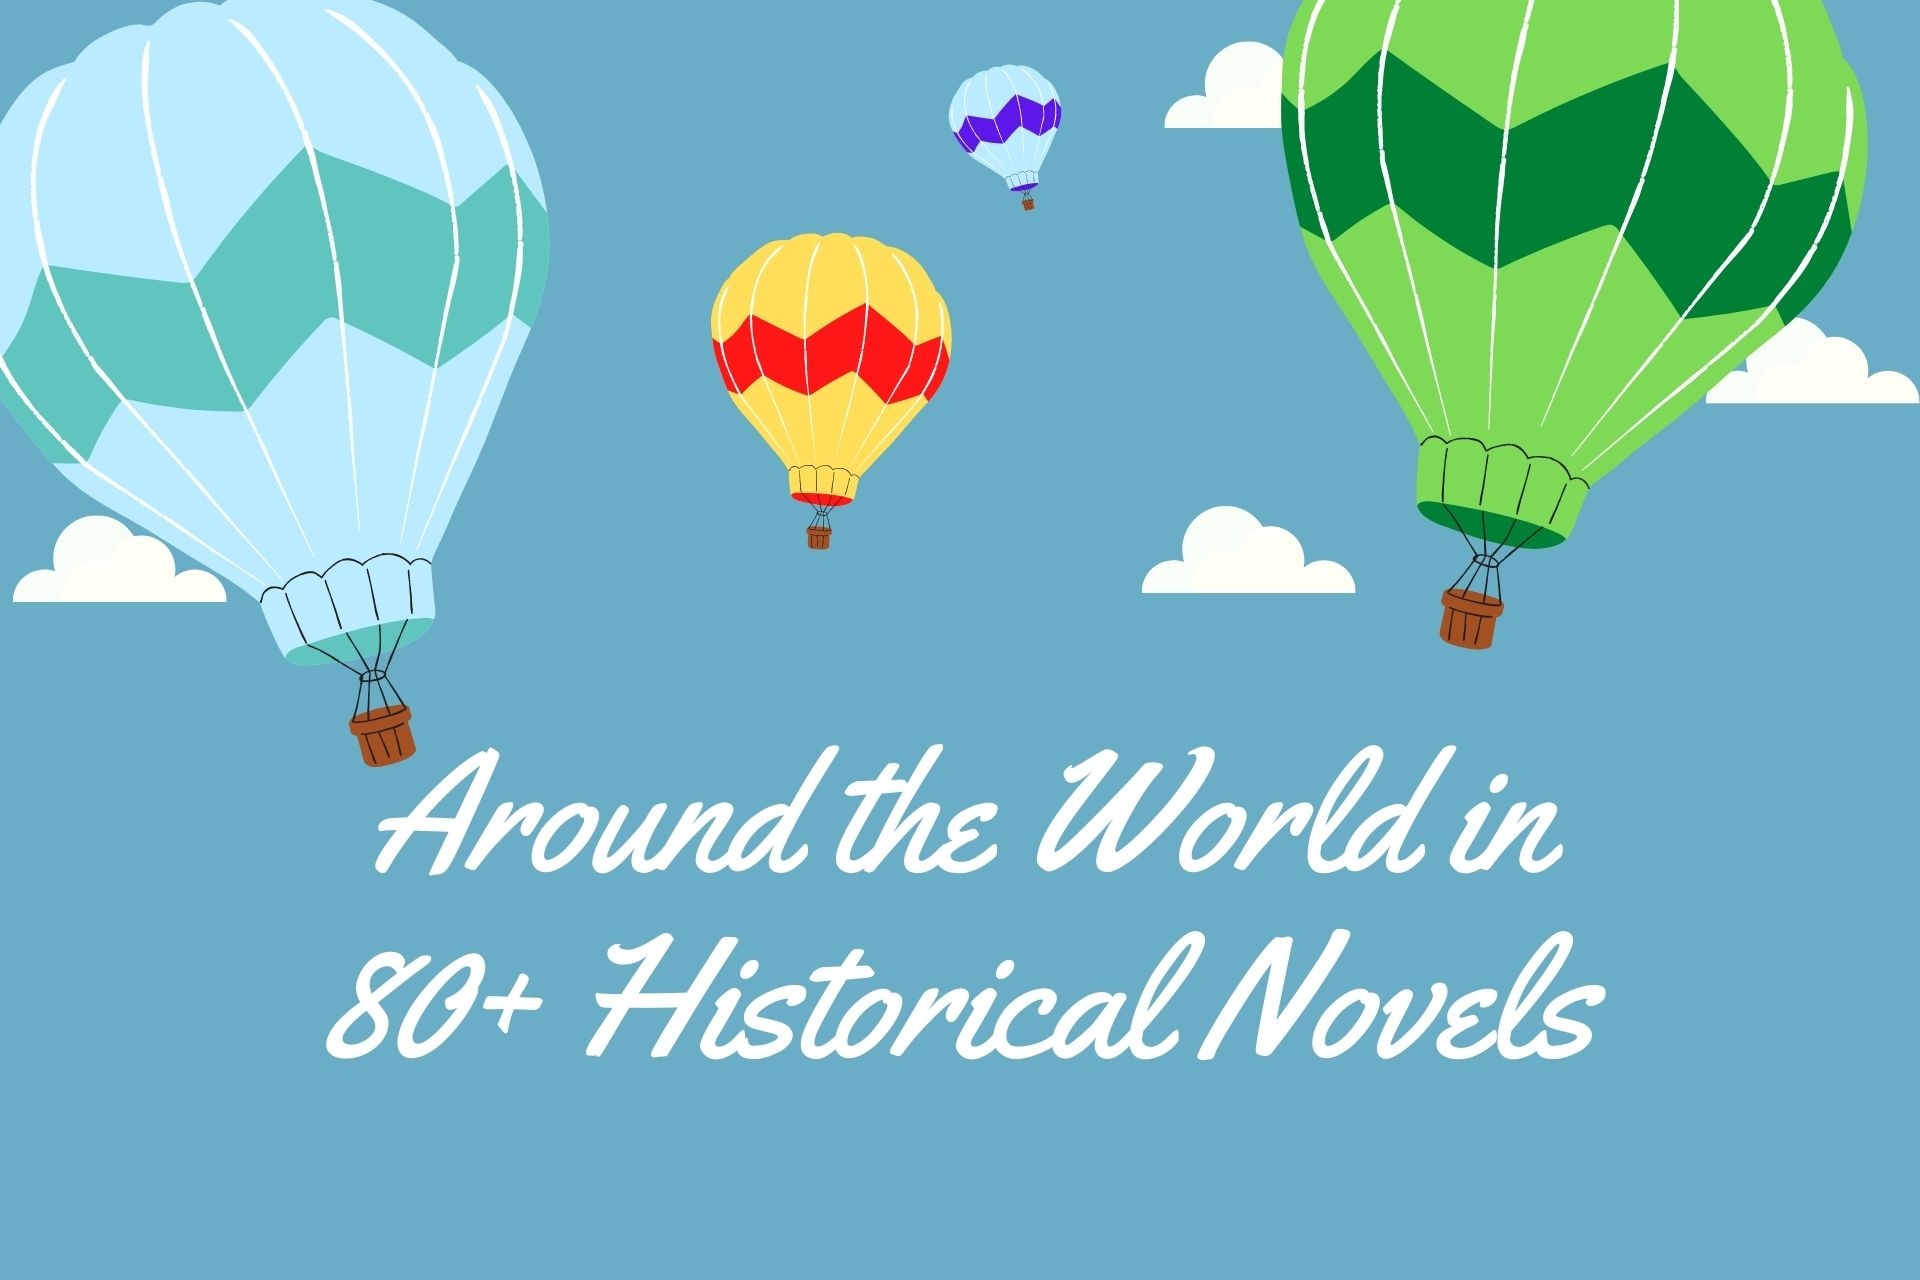 Around the World in 80+ Historical Novels.